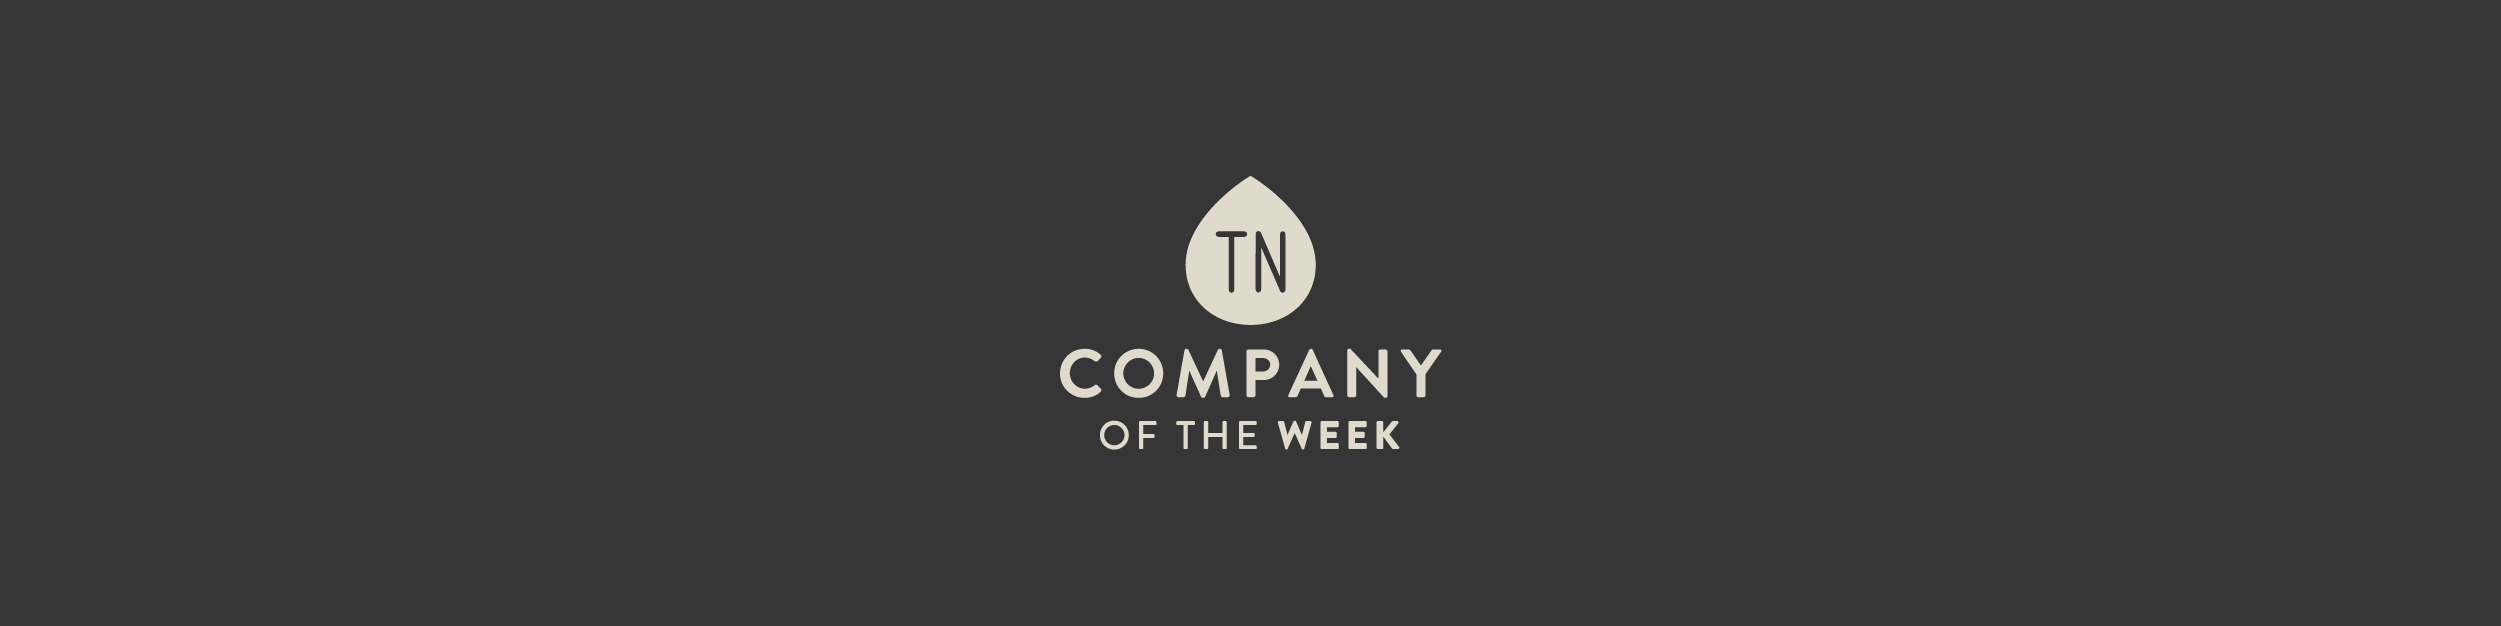 Company of the week banner 3